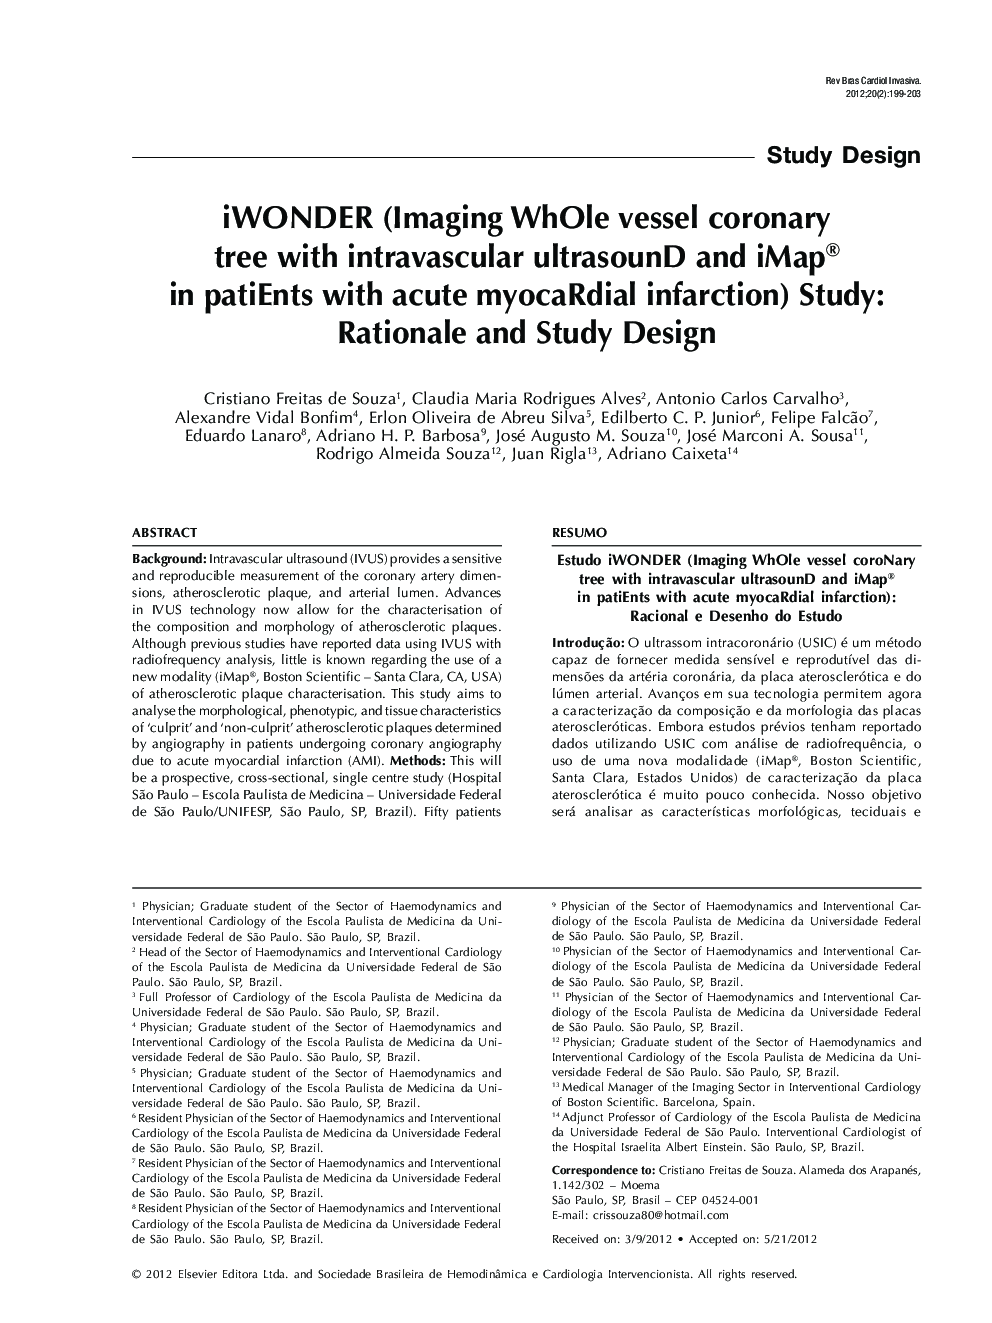 iWONDER (Imaging WhOle vessel coronary tree with intravascular ultrasounD and iMap® in patiEnts with acute myocaRdial infarction) Study: Rationale and Study Design